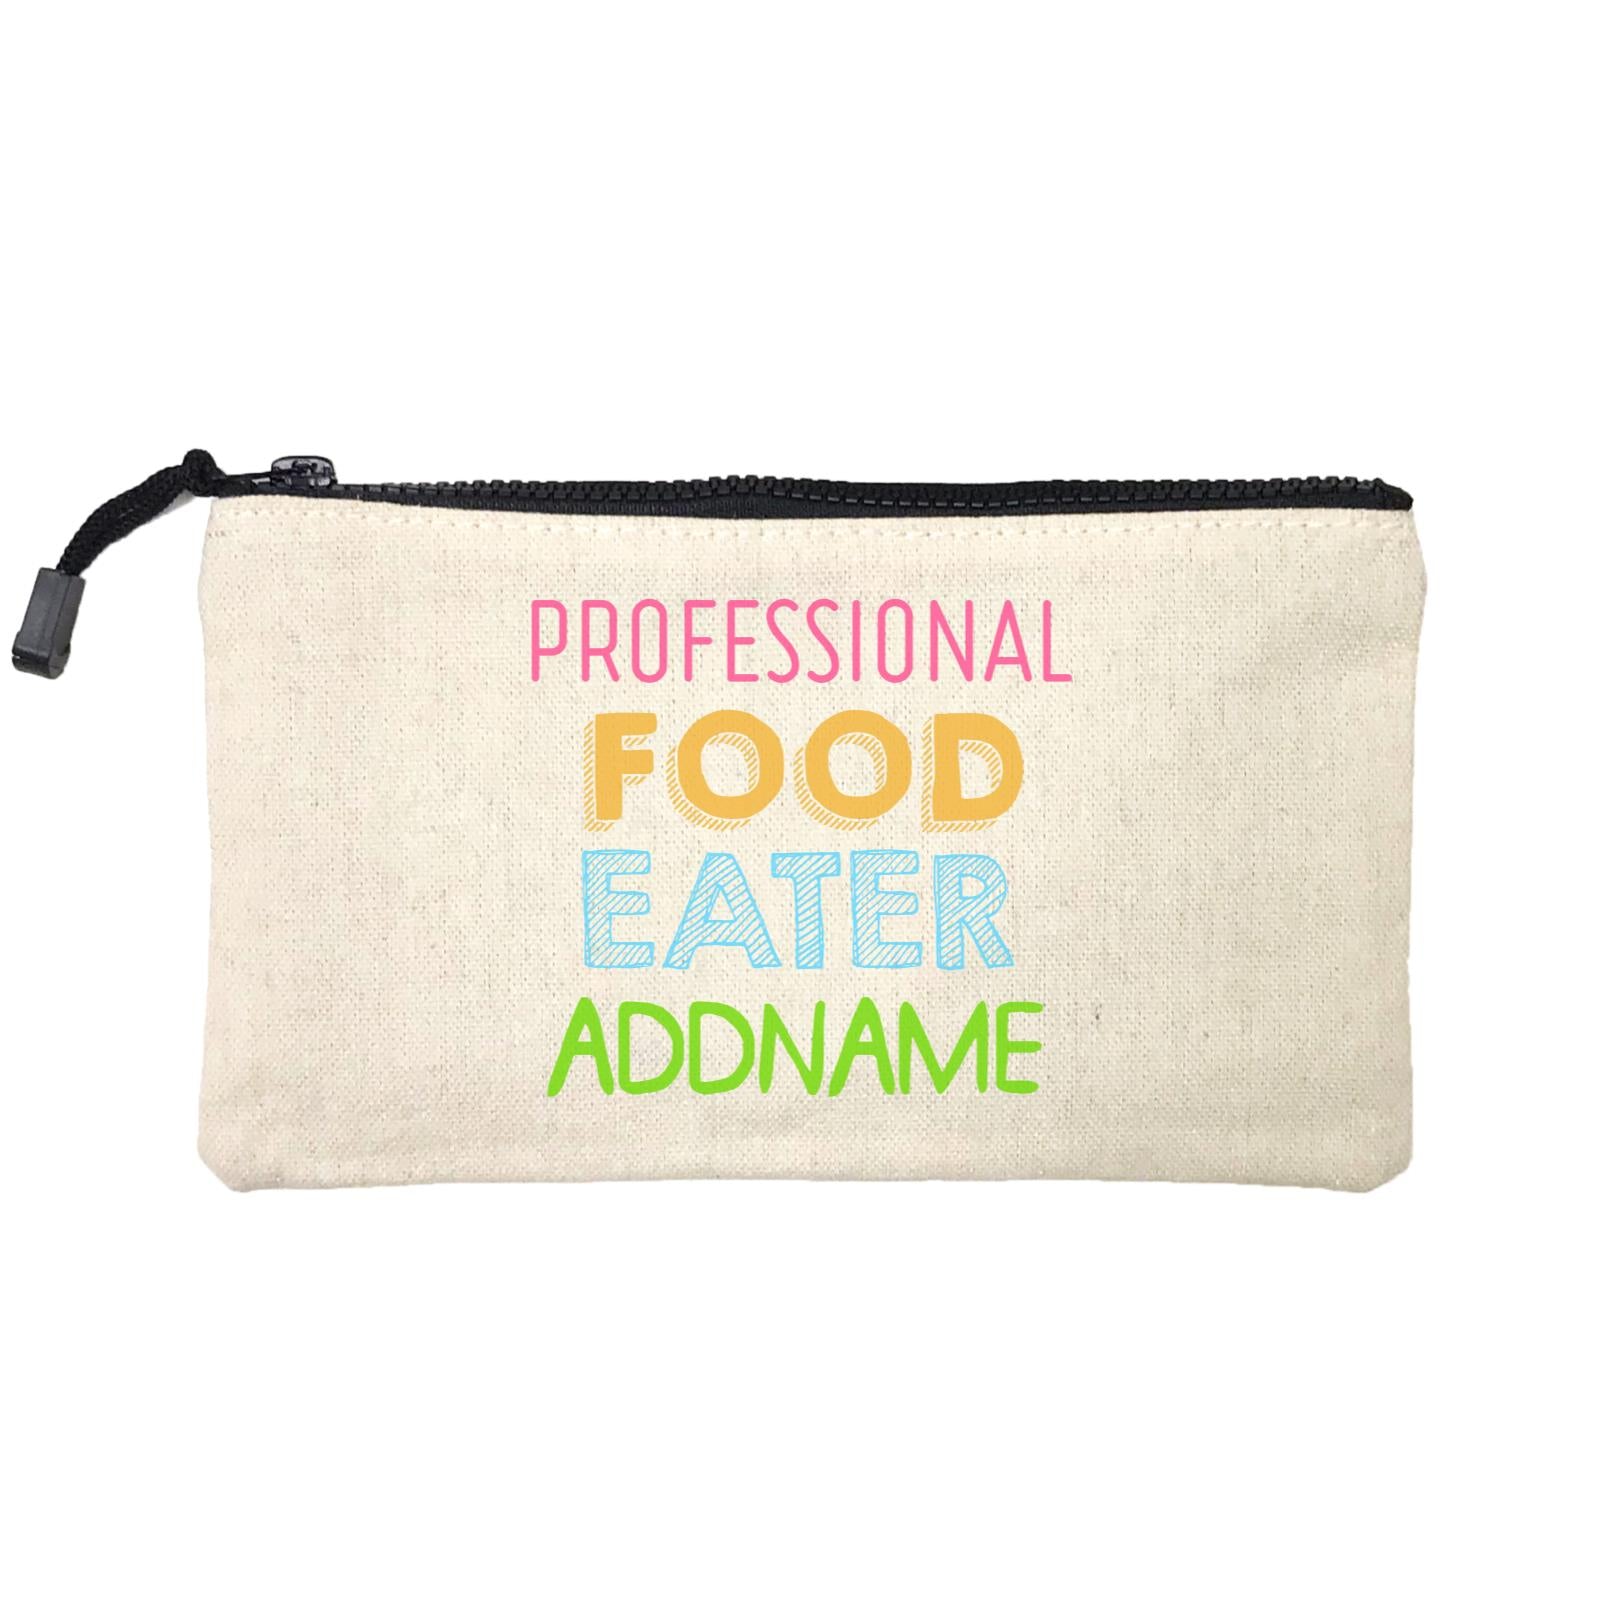 Professional Food Eater Addname Mini Accessories Stationery Pouch